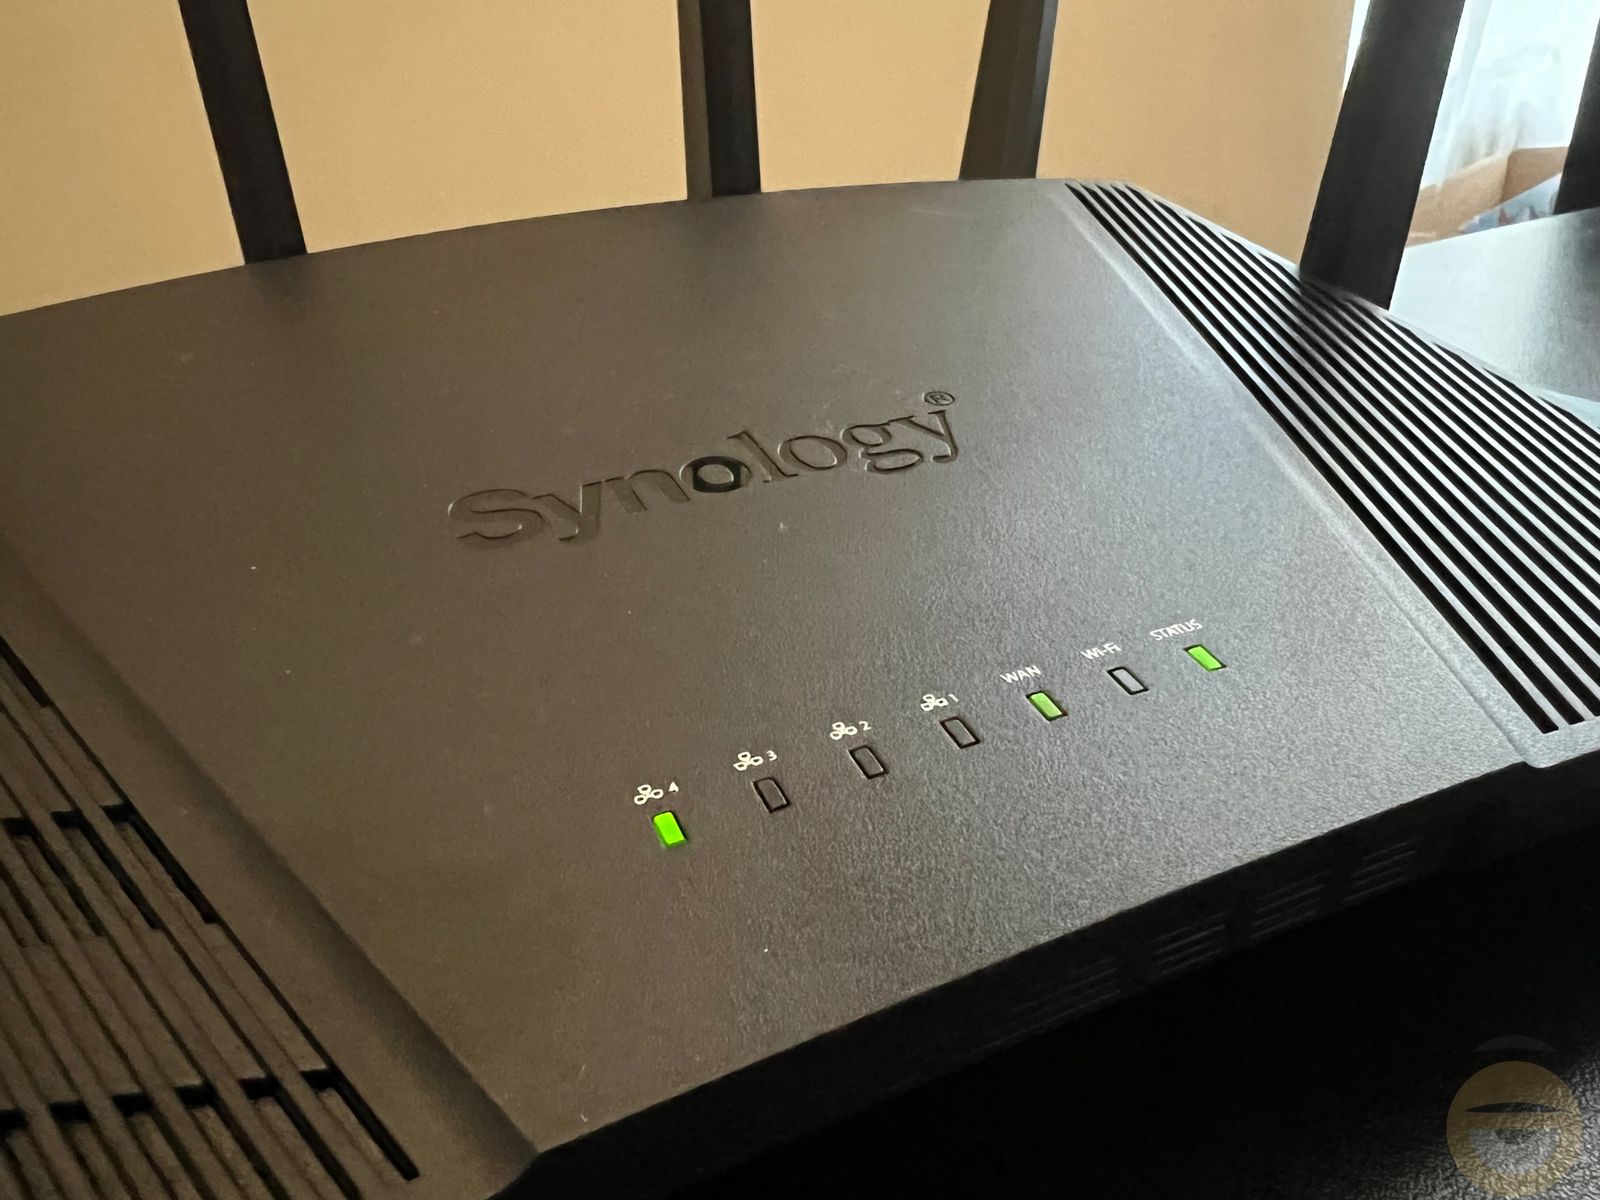 Synology RT6600ax Review